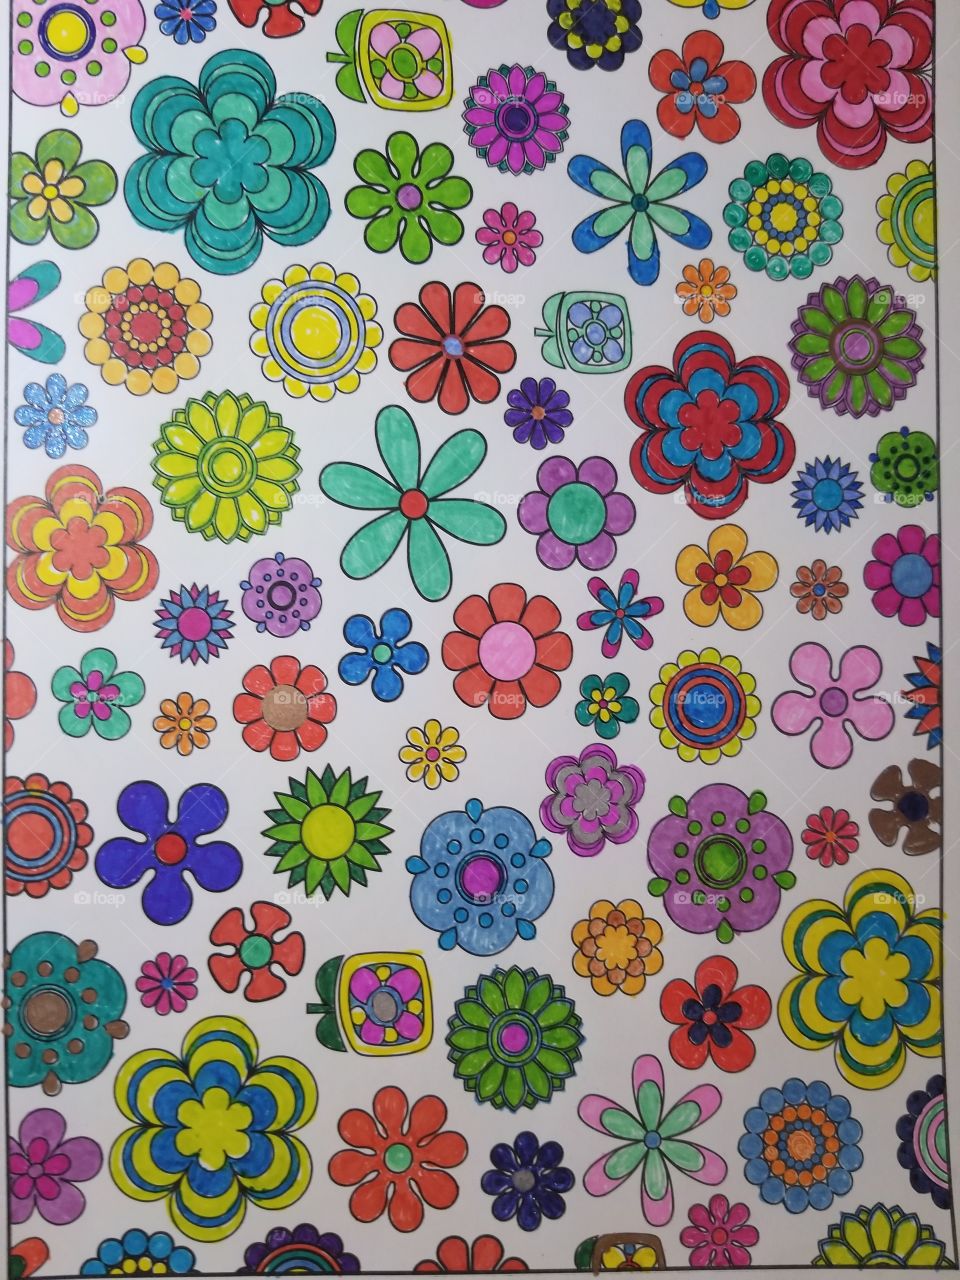 Flower Power Adult coloring.